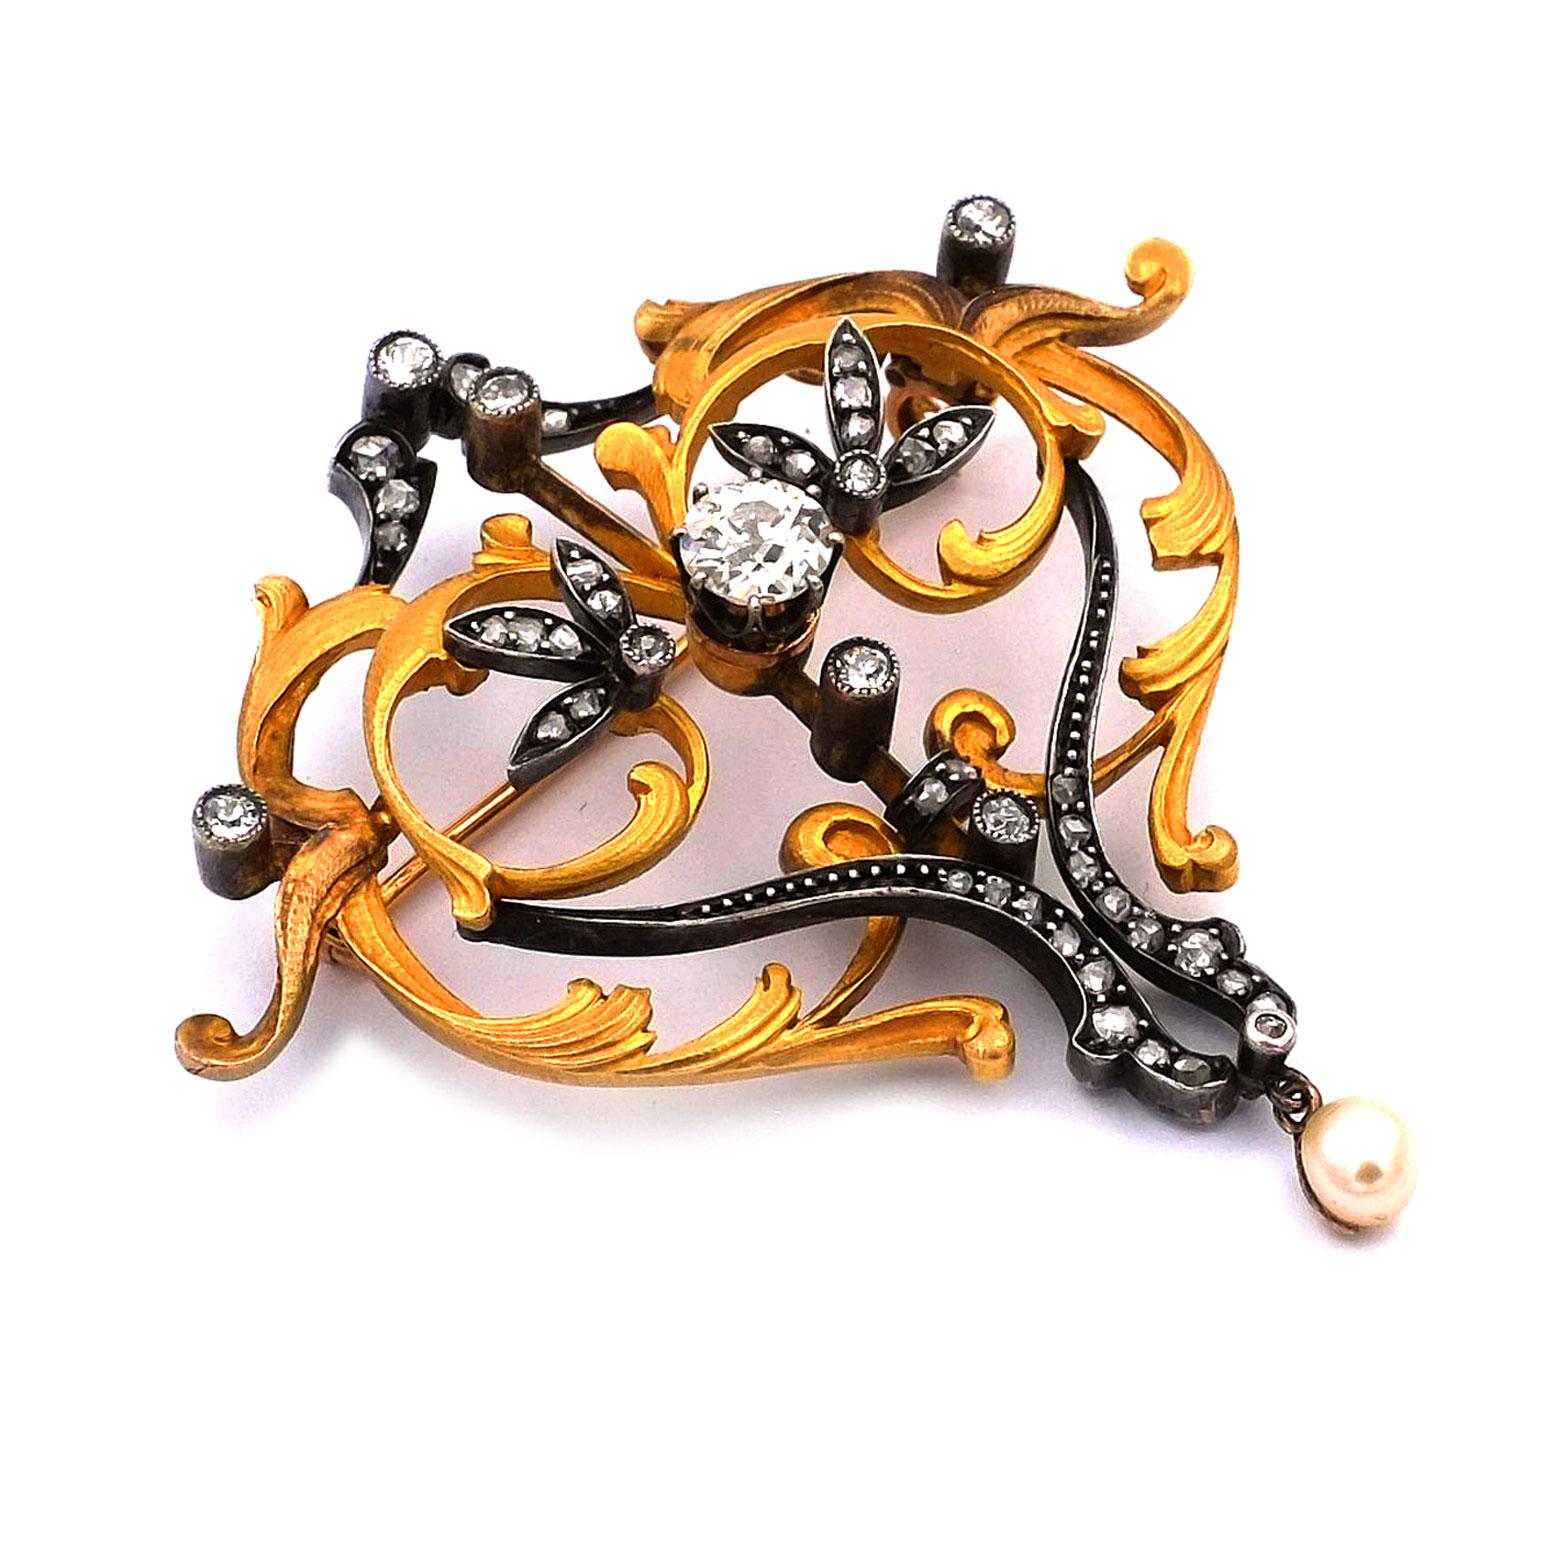 Art Nouveau 1.2ct Diamond 18K Gold Brooch circa 1900

Magnificent Art Nouveau brooch made of high-quality gold in the form of an openwork cartouche made of very fine leaf tendrils and flowers, centrally set with a large old-cut diamond weighing